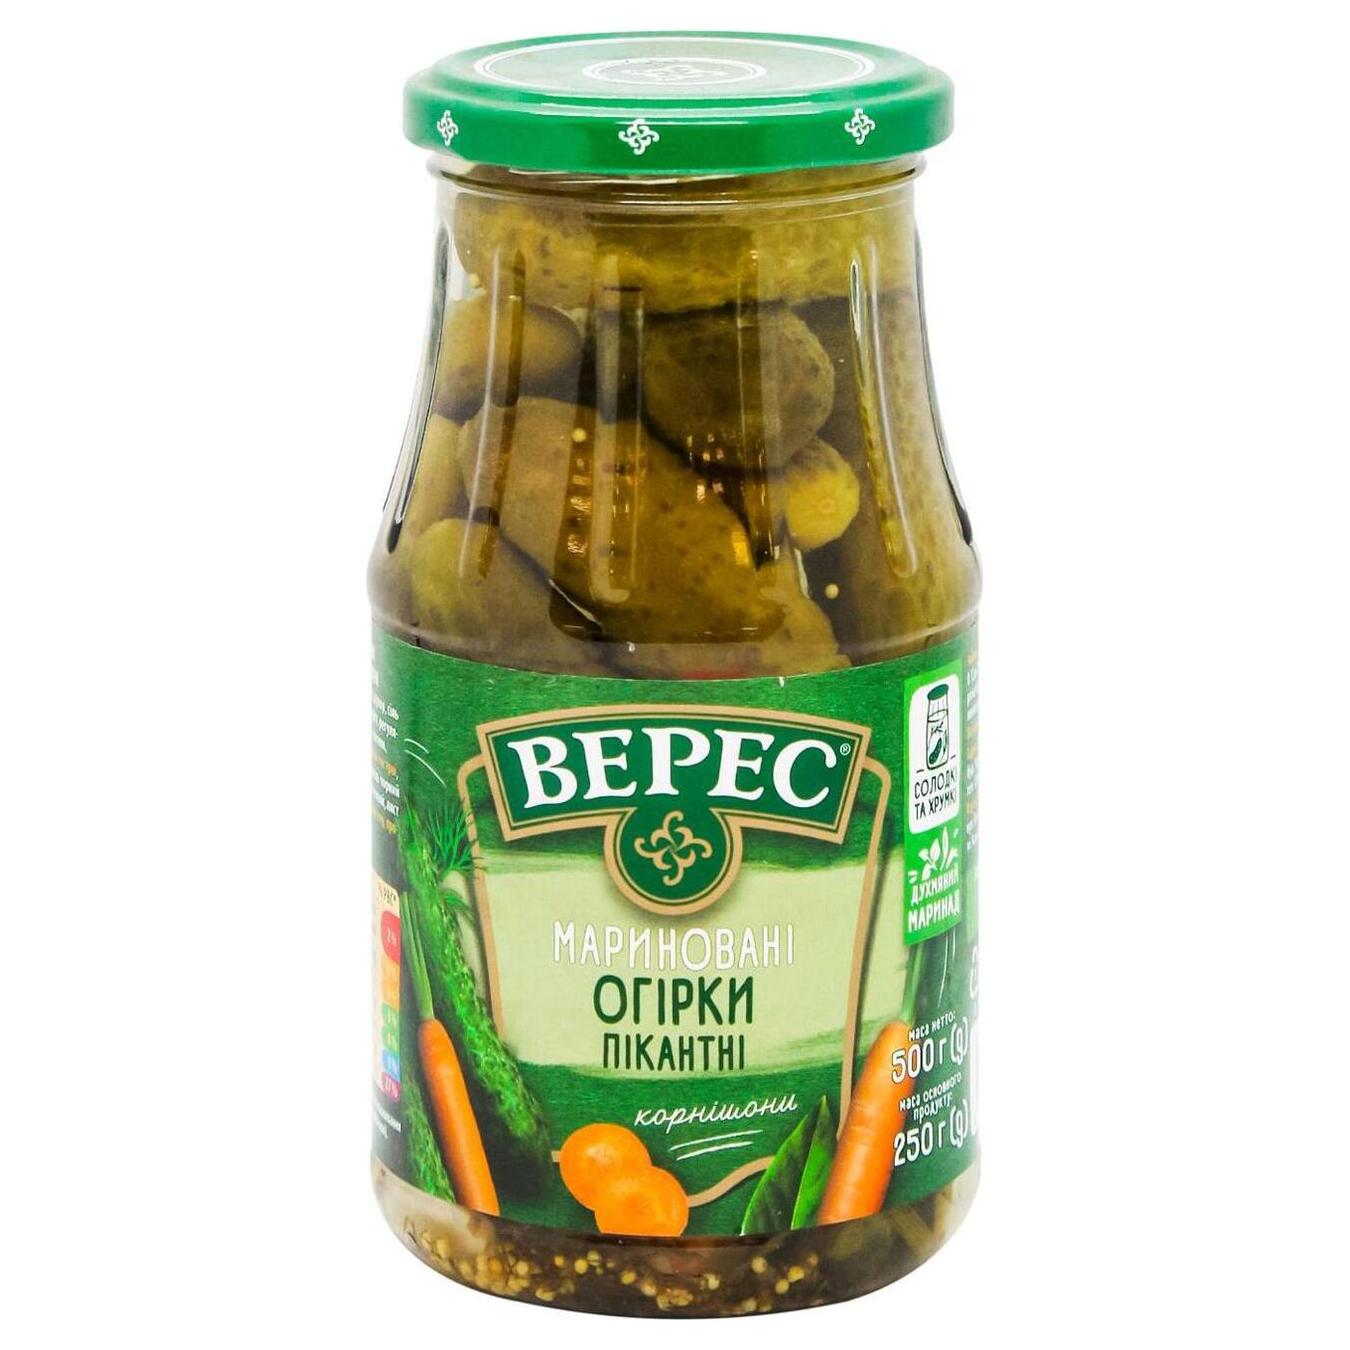 Veres spicy pickled cucumbers 500g glass